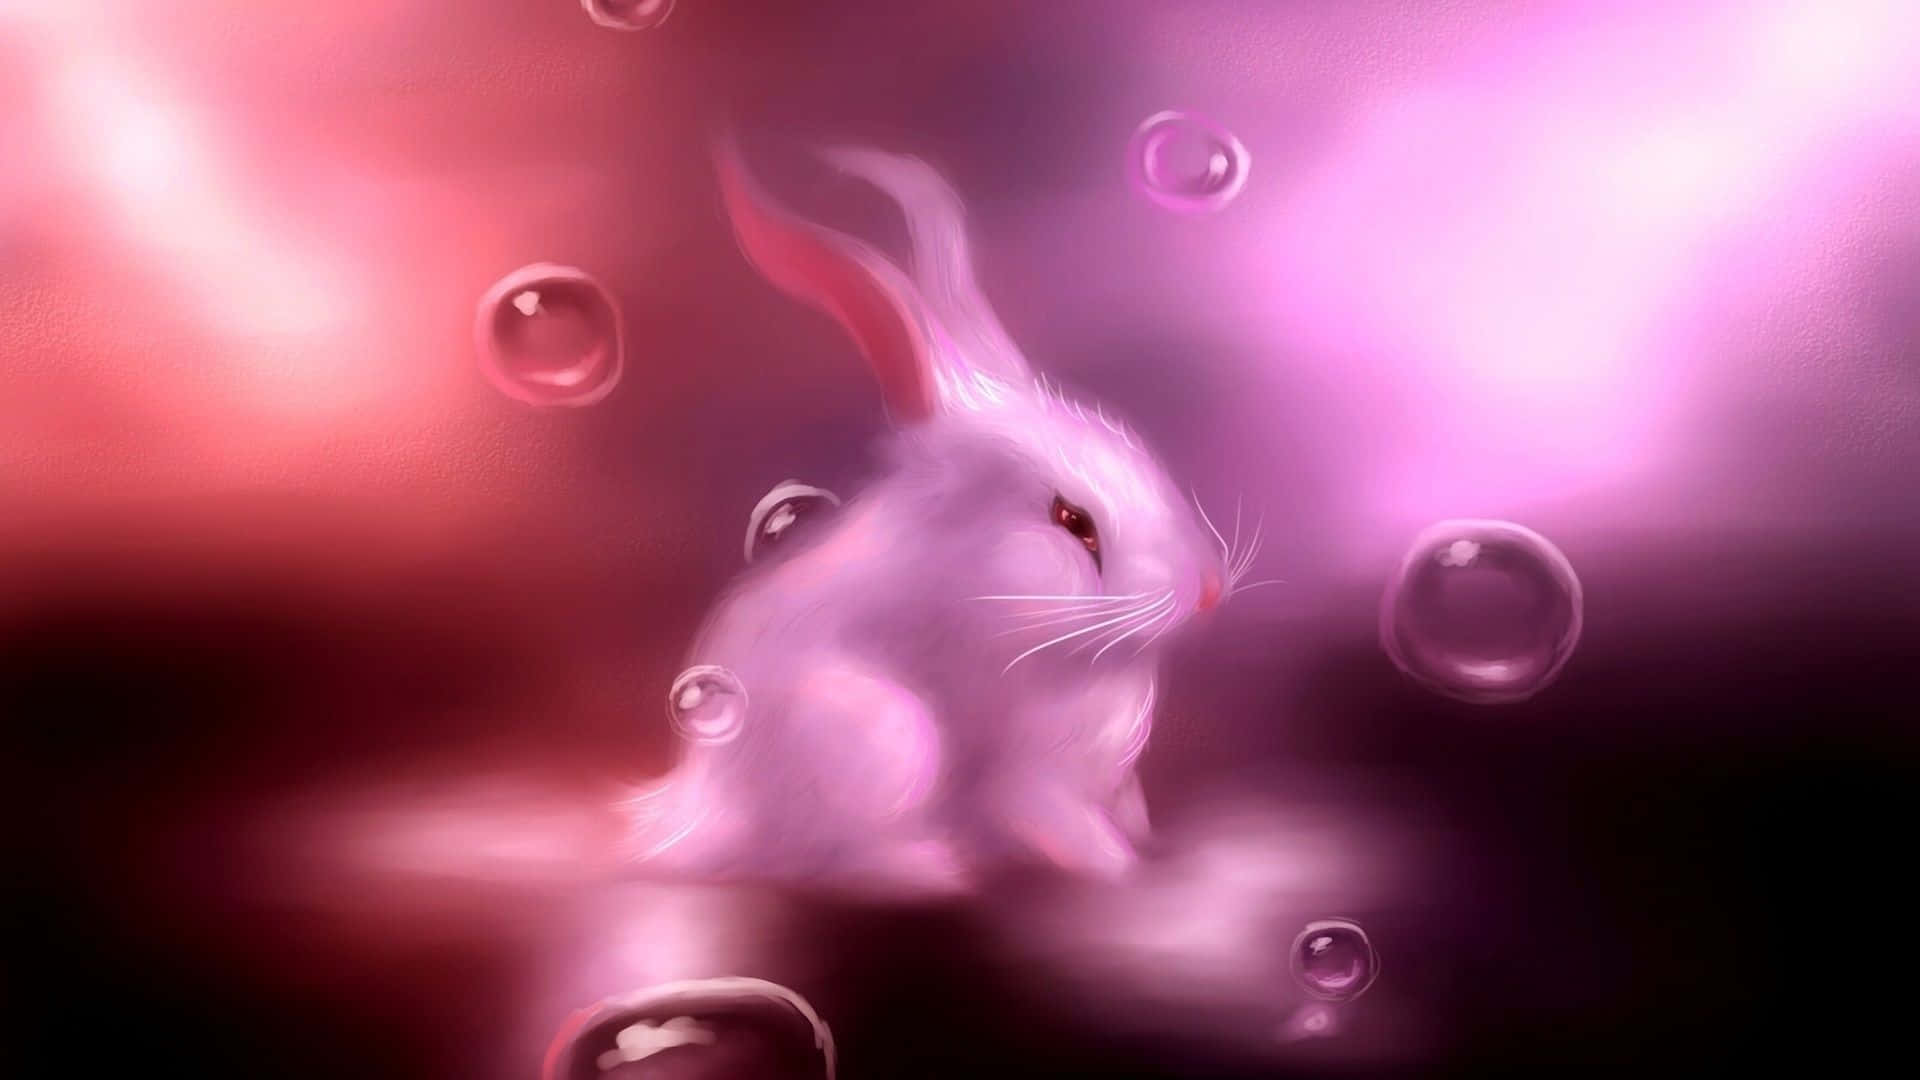 Adorable Pink Bunny in Sunshine Wallpaper